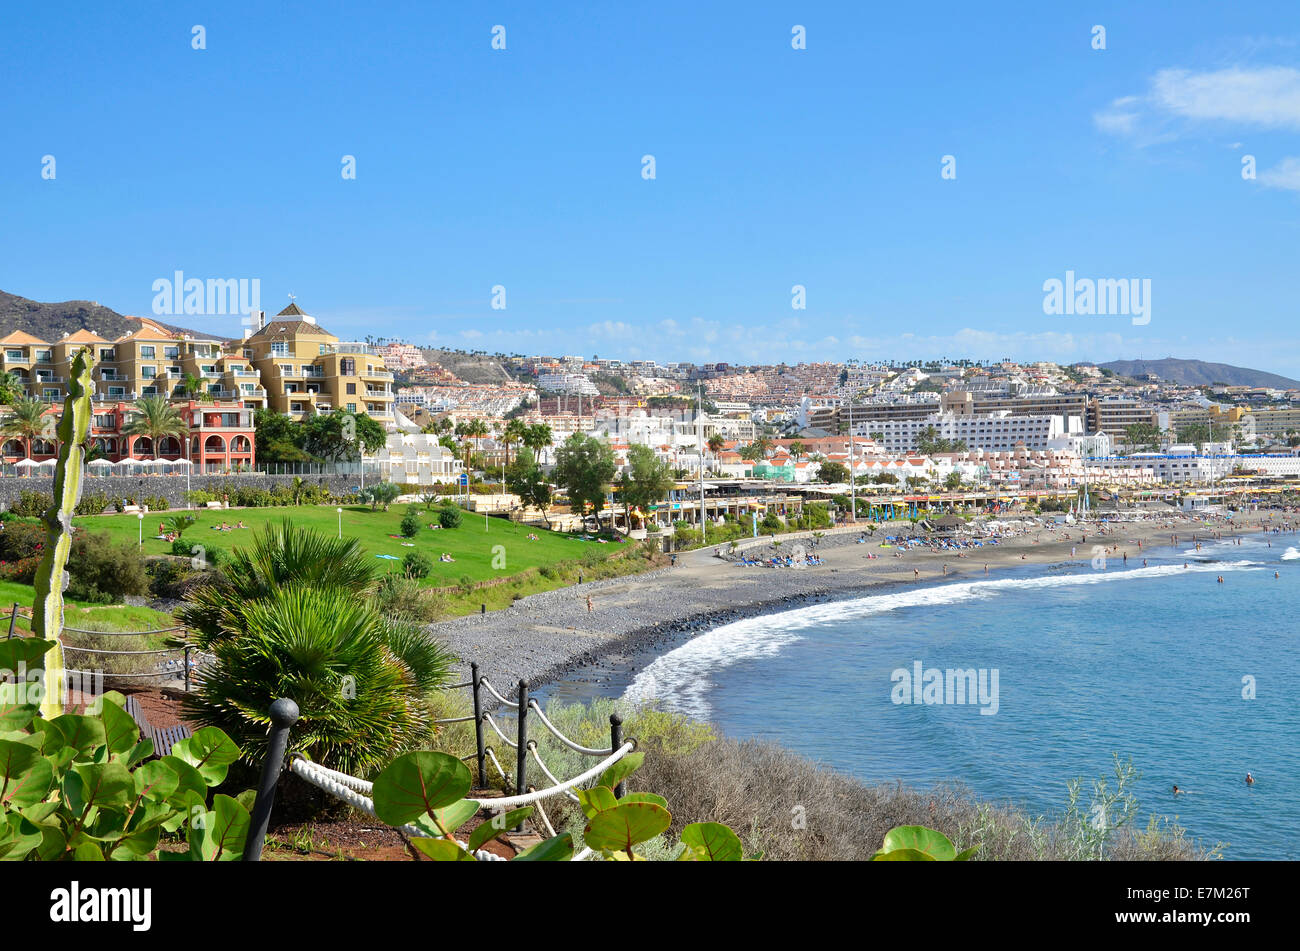 Looking towards Torviscas from Fanabe on the Costa Adeje in Tenerife, Canary Islands Stock Photo